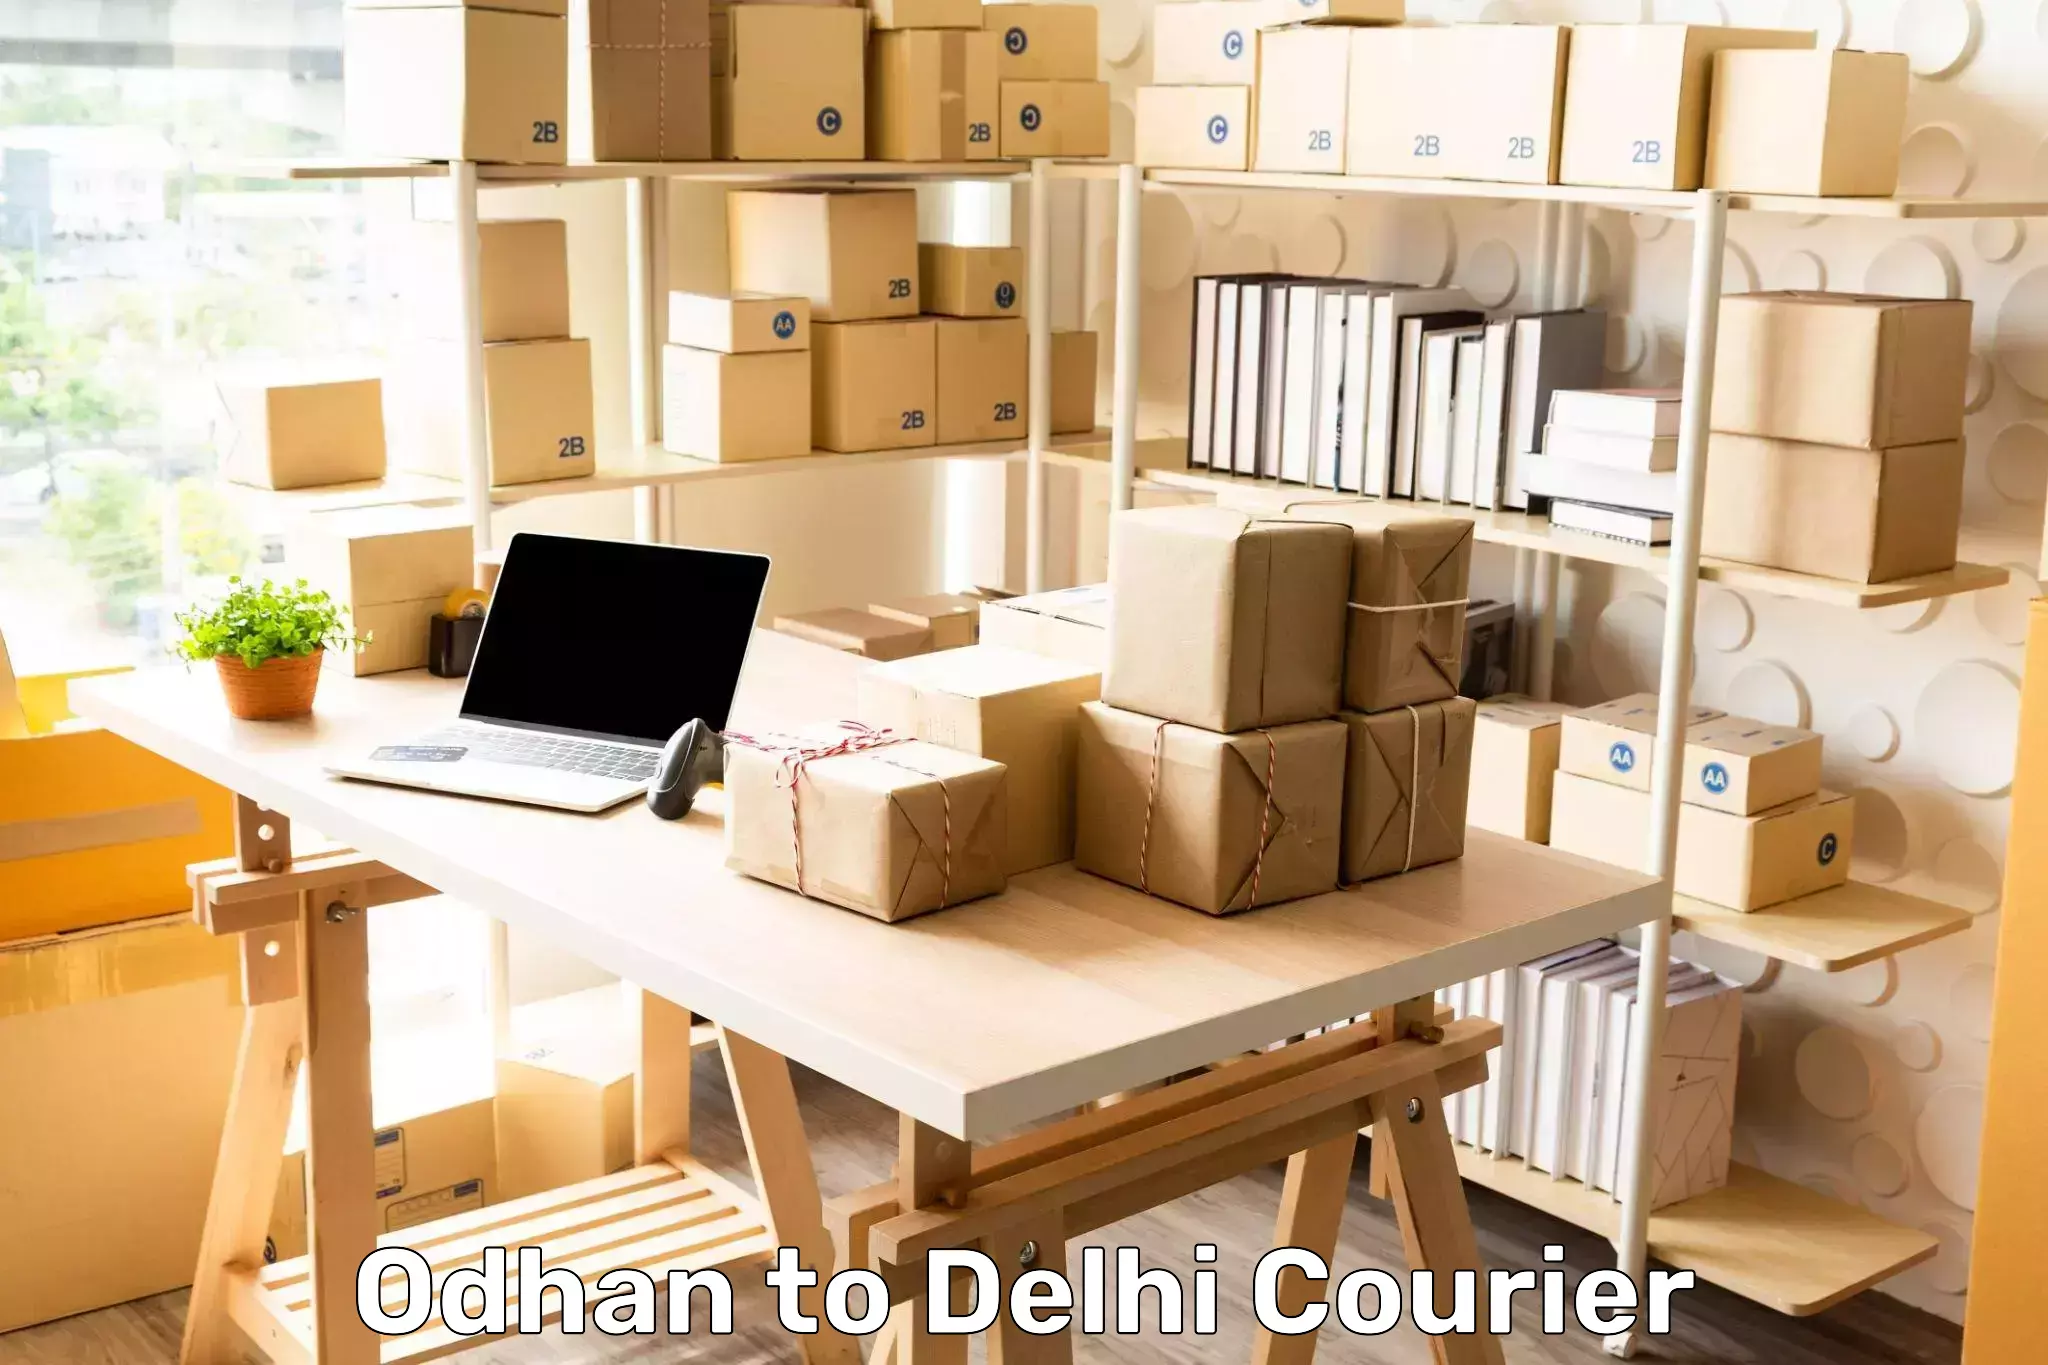 Online shipping calculator in Odhan to NCR